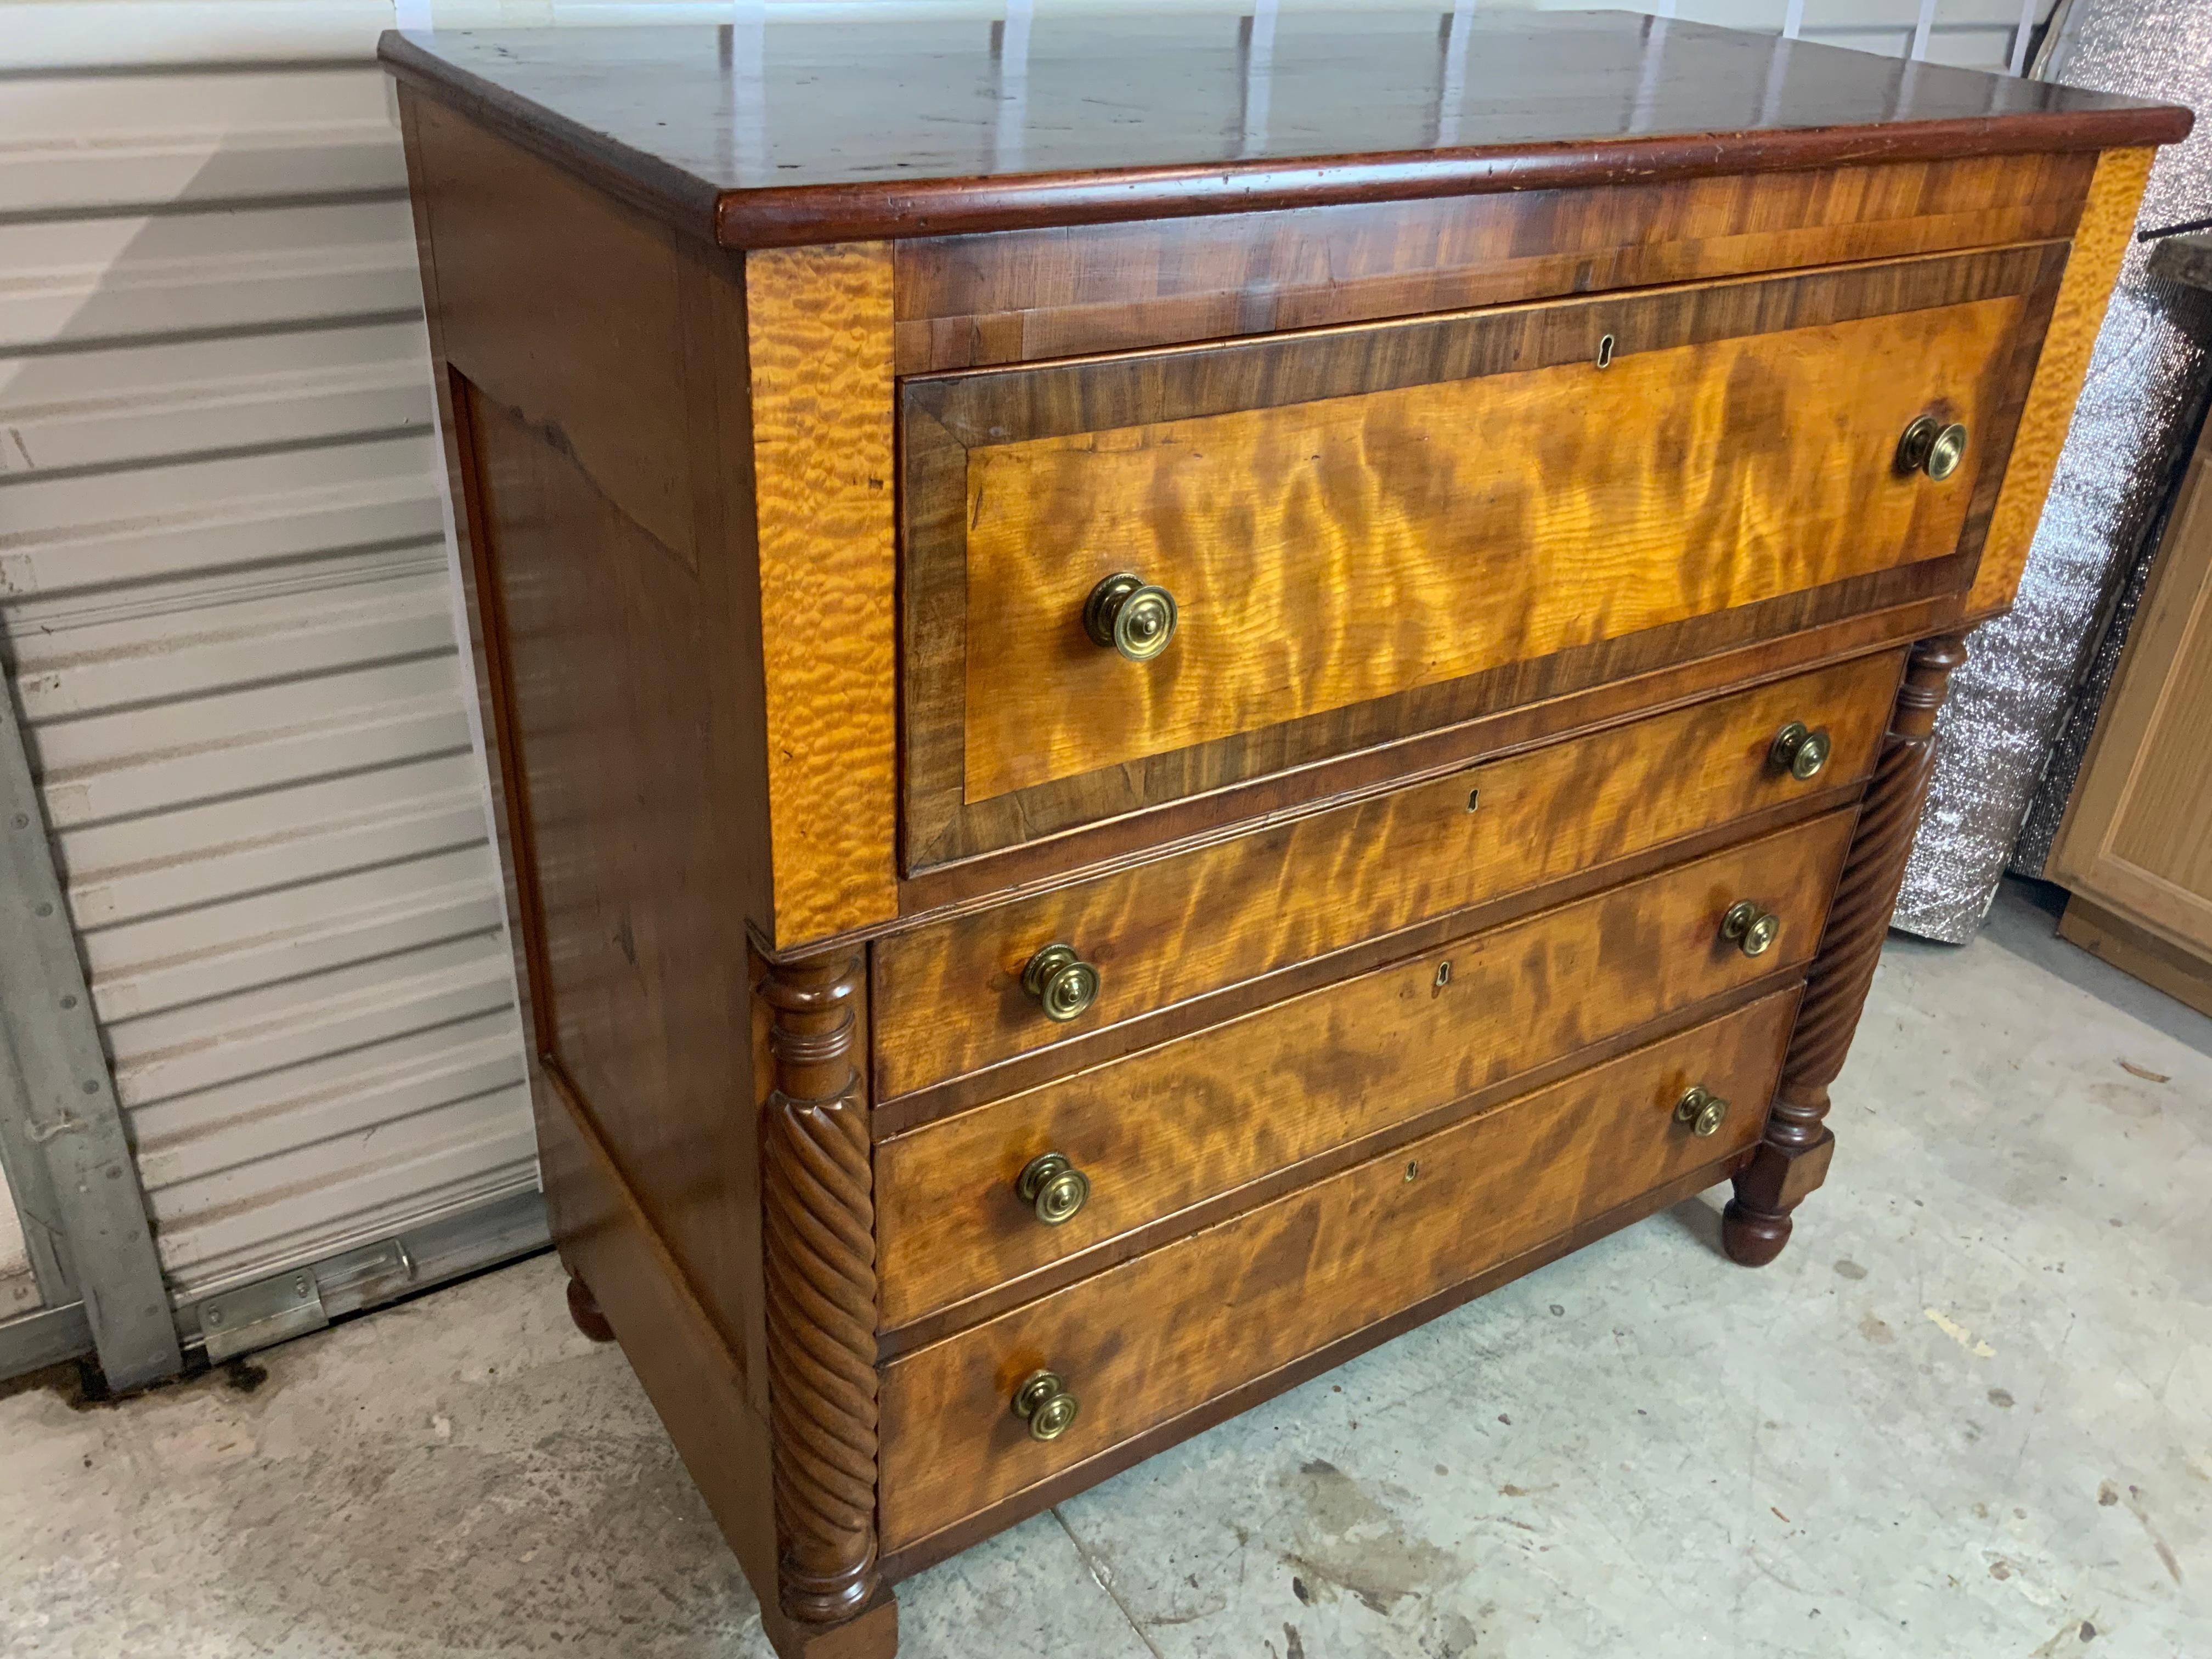  19th century figured Cherry and Quilted Maple Butlers Desk.  Nicely figured Cherry on the case and drawer fronts and quilted Maple on the top of the carved twisted columns and the fitted interior drawers.  New fabric has been installed on the